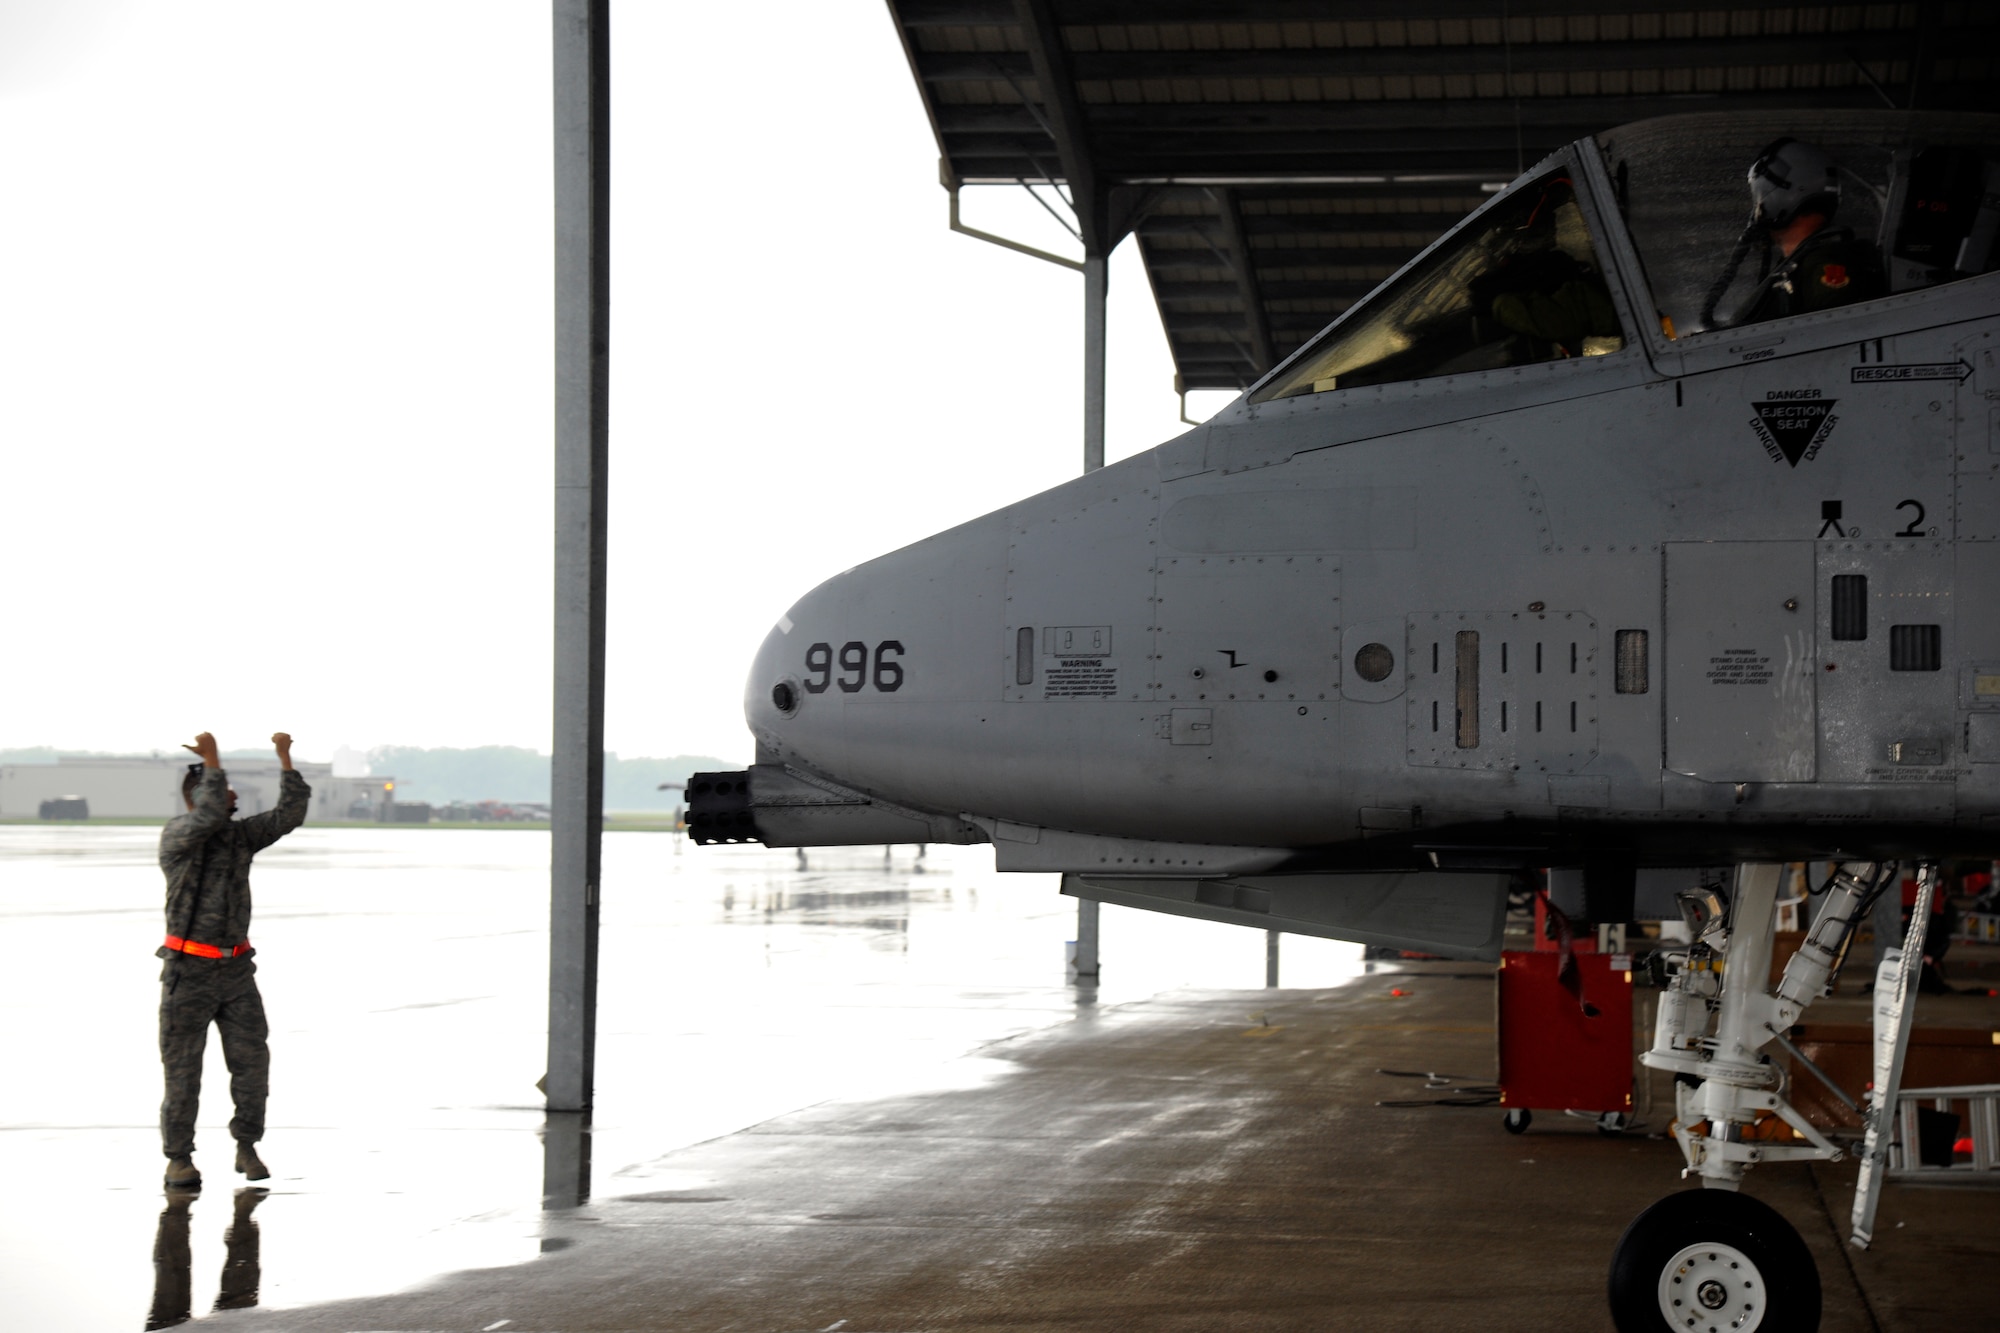 TSgt Recardo Perez, a crew chief from the 127th Aircraft Maintenance Squadron, marshals an A-10 Thunderbolt II to the flight line for a lunch during flight operations on Selfridge Air National Guard Base, Mich., Aug. 10, 2012. The 127th AMXS crew launched, recovered, and turned A-10s throughout the day, during a surge operation.  (Air National Guard photo by TSgt. David Kujawa)